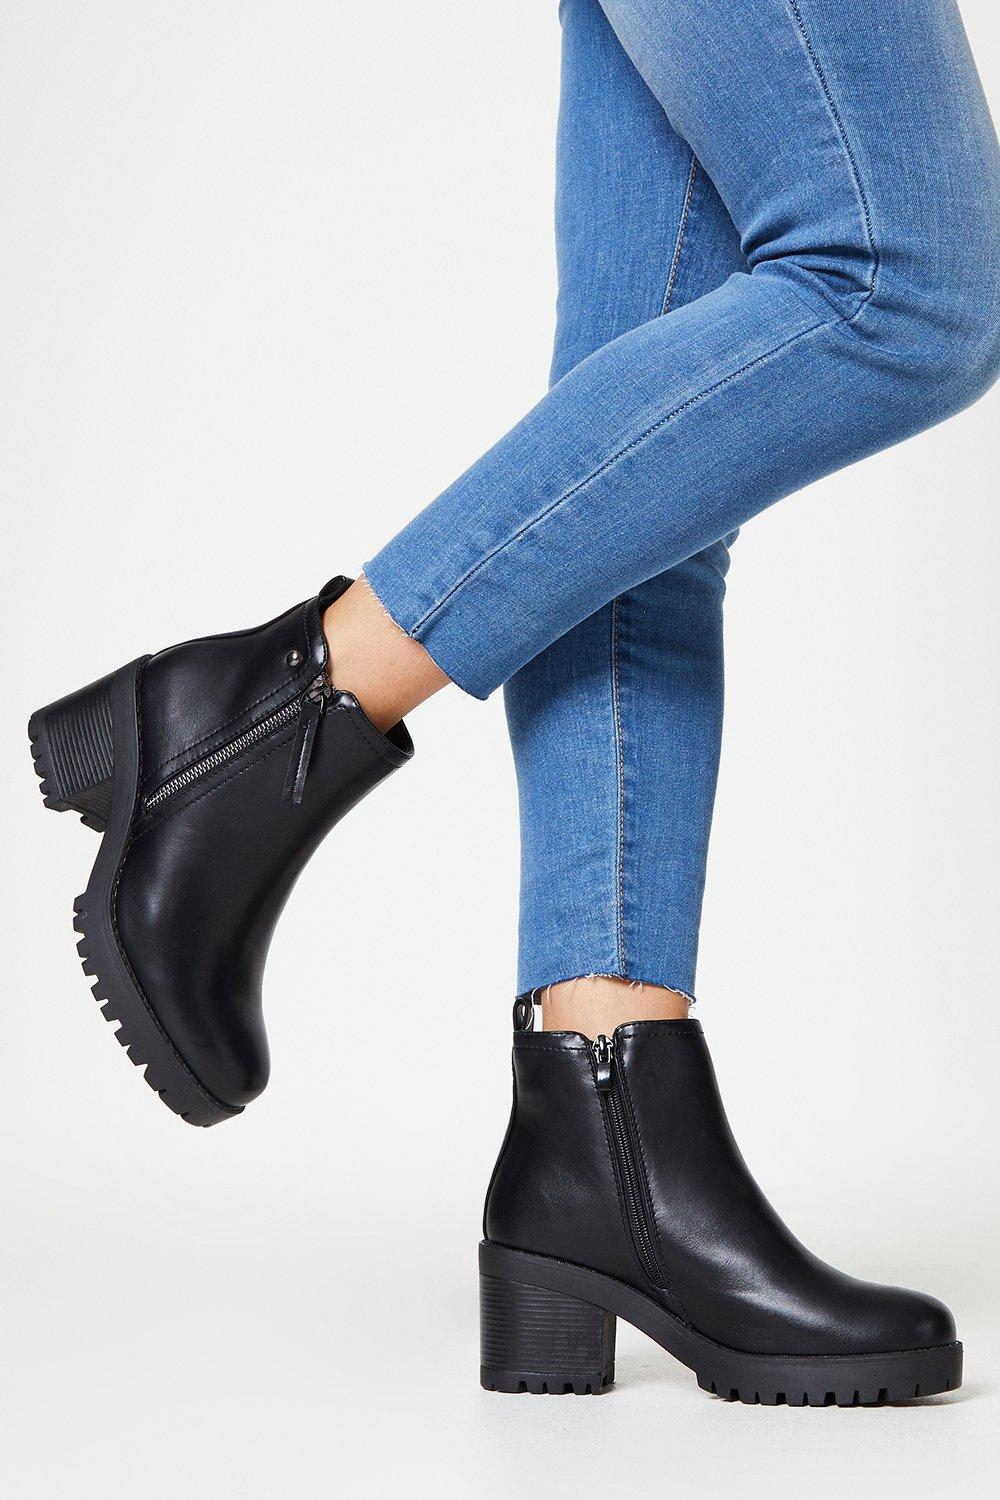 Women’s Faith: Madden Cleated Chunky Side Zip Block Heel Ankle Boots - black - 7